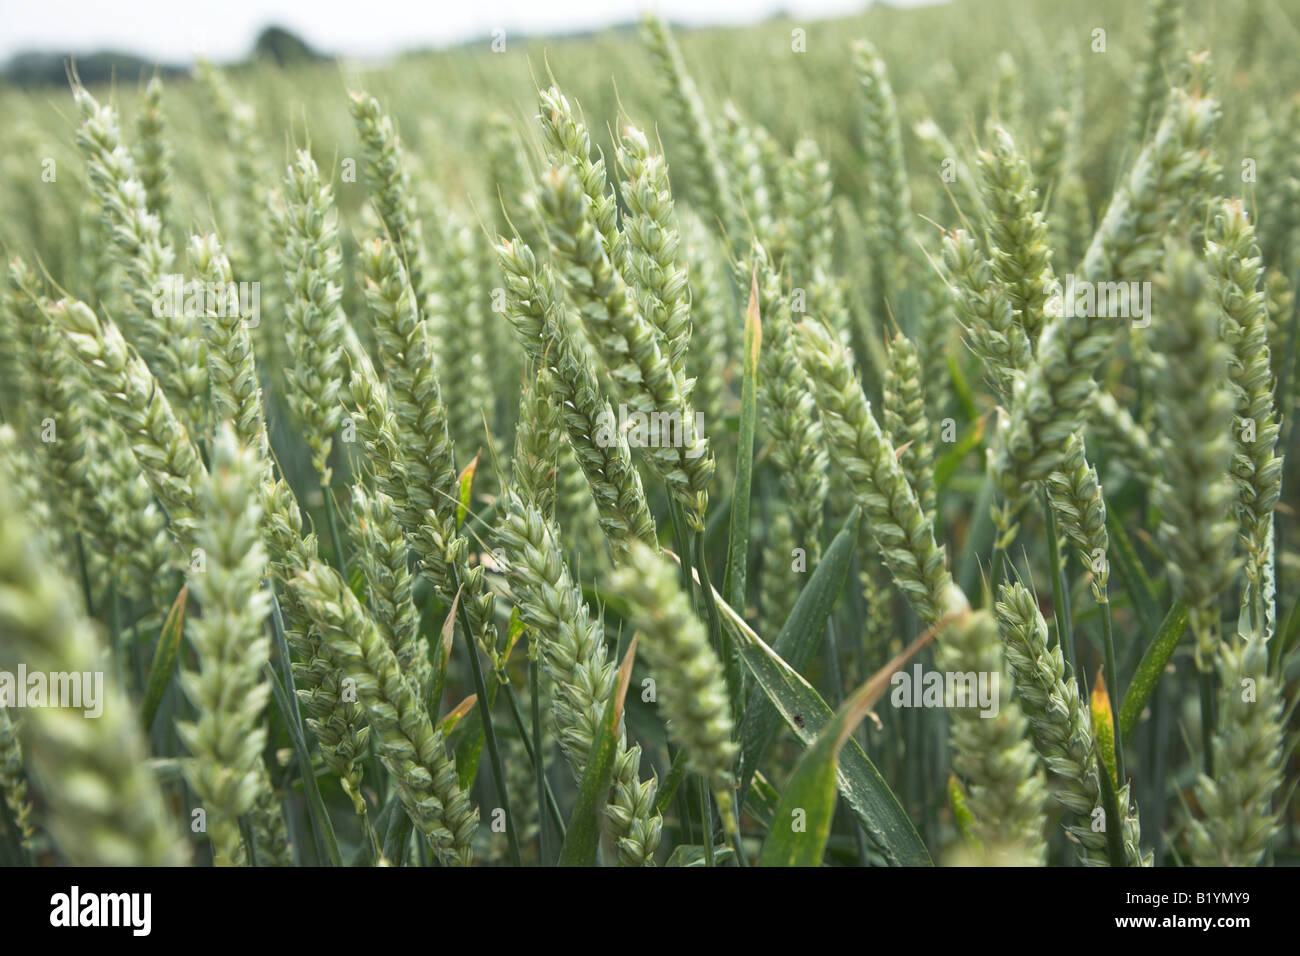 Close up full frame shot of green wheat ears and stalks in field Stock Photo